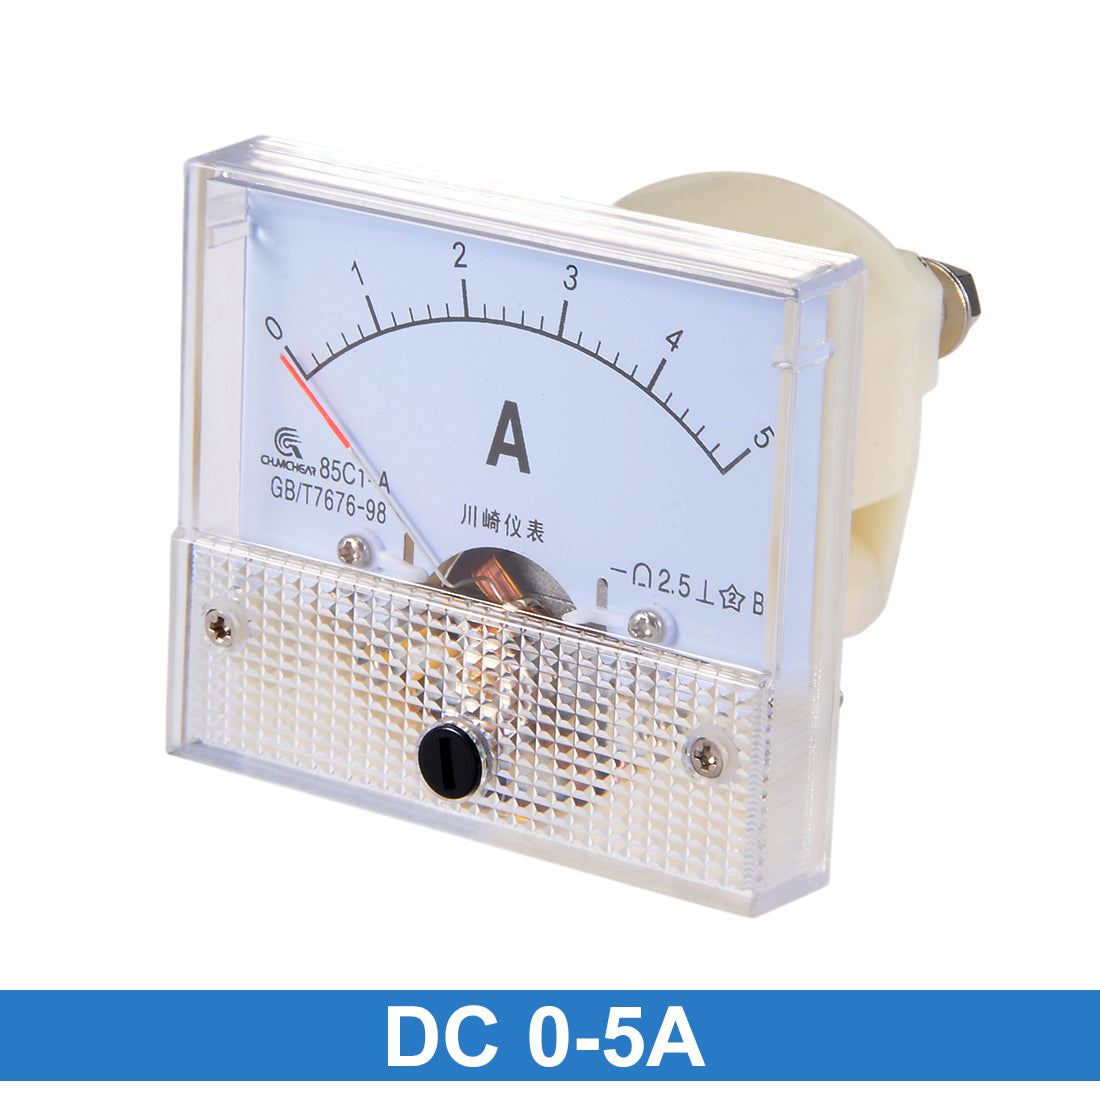 uxcell Uxcell 85C1-A Analog Current Panel Meter DC 5A Ammeter for Circuit Testing Ampere Tester Gauge 1 PCS